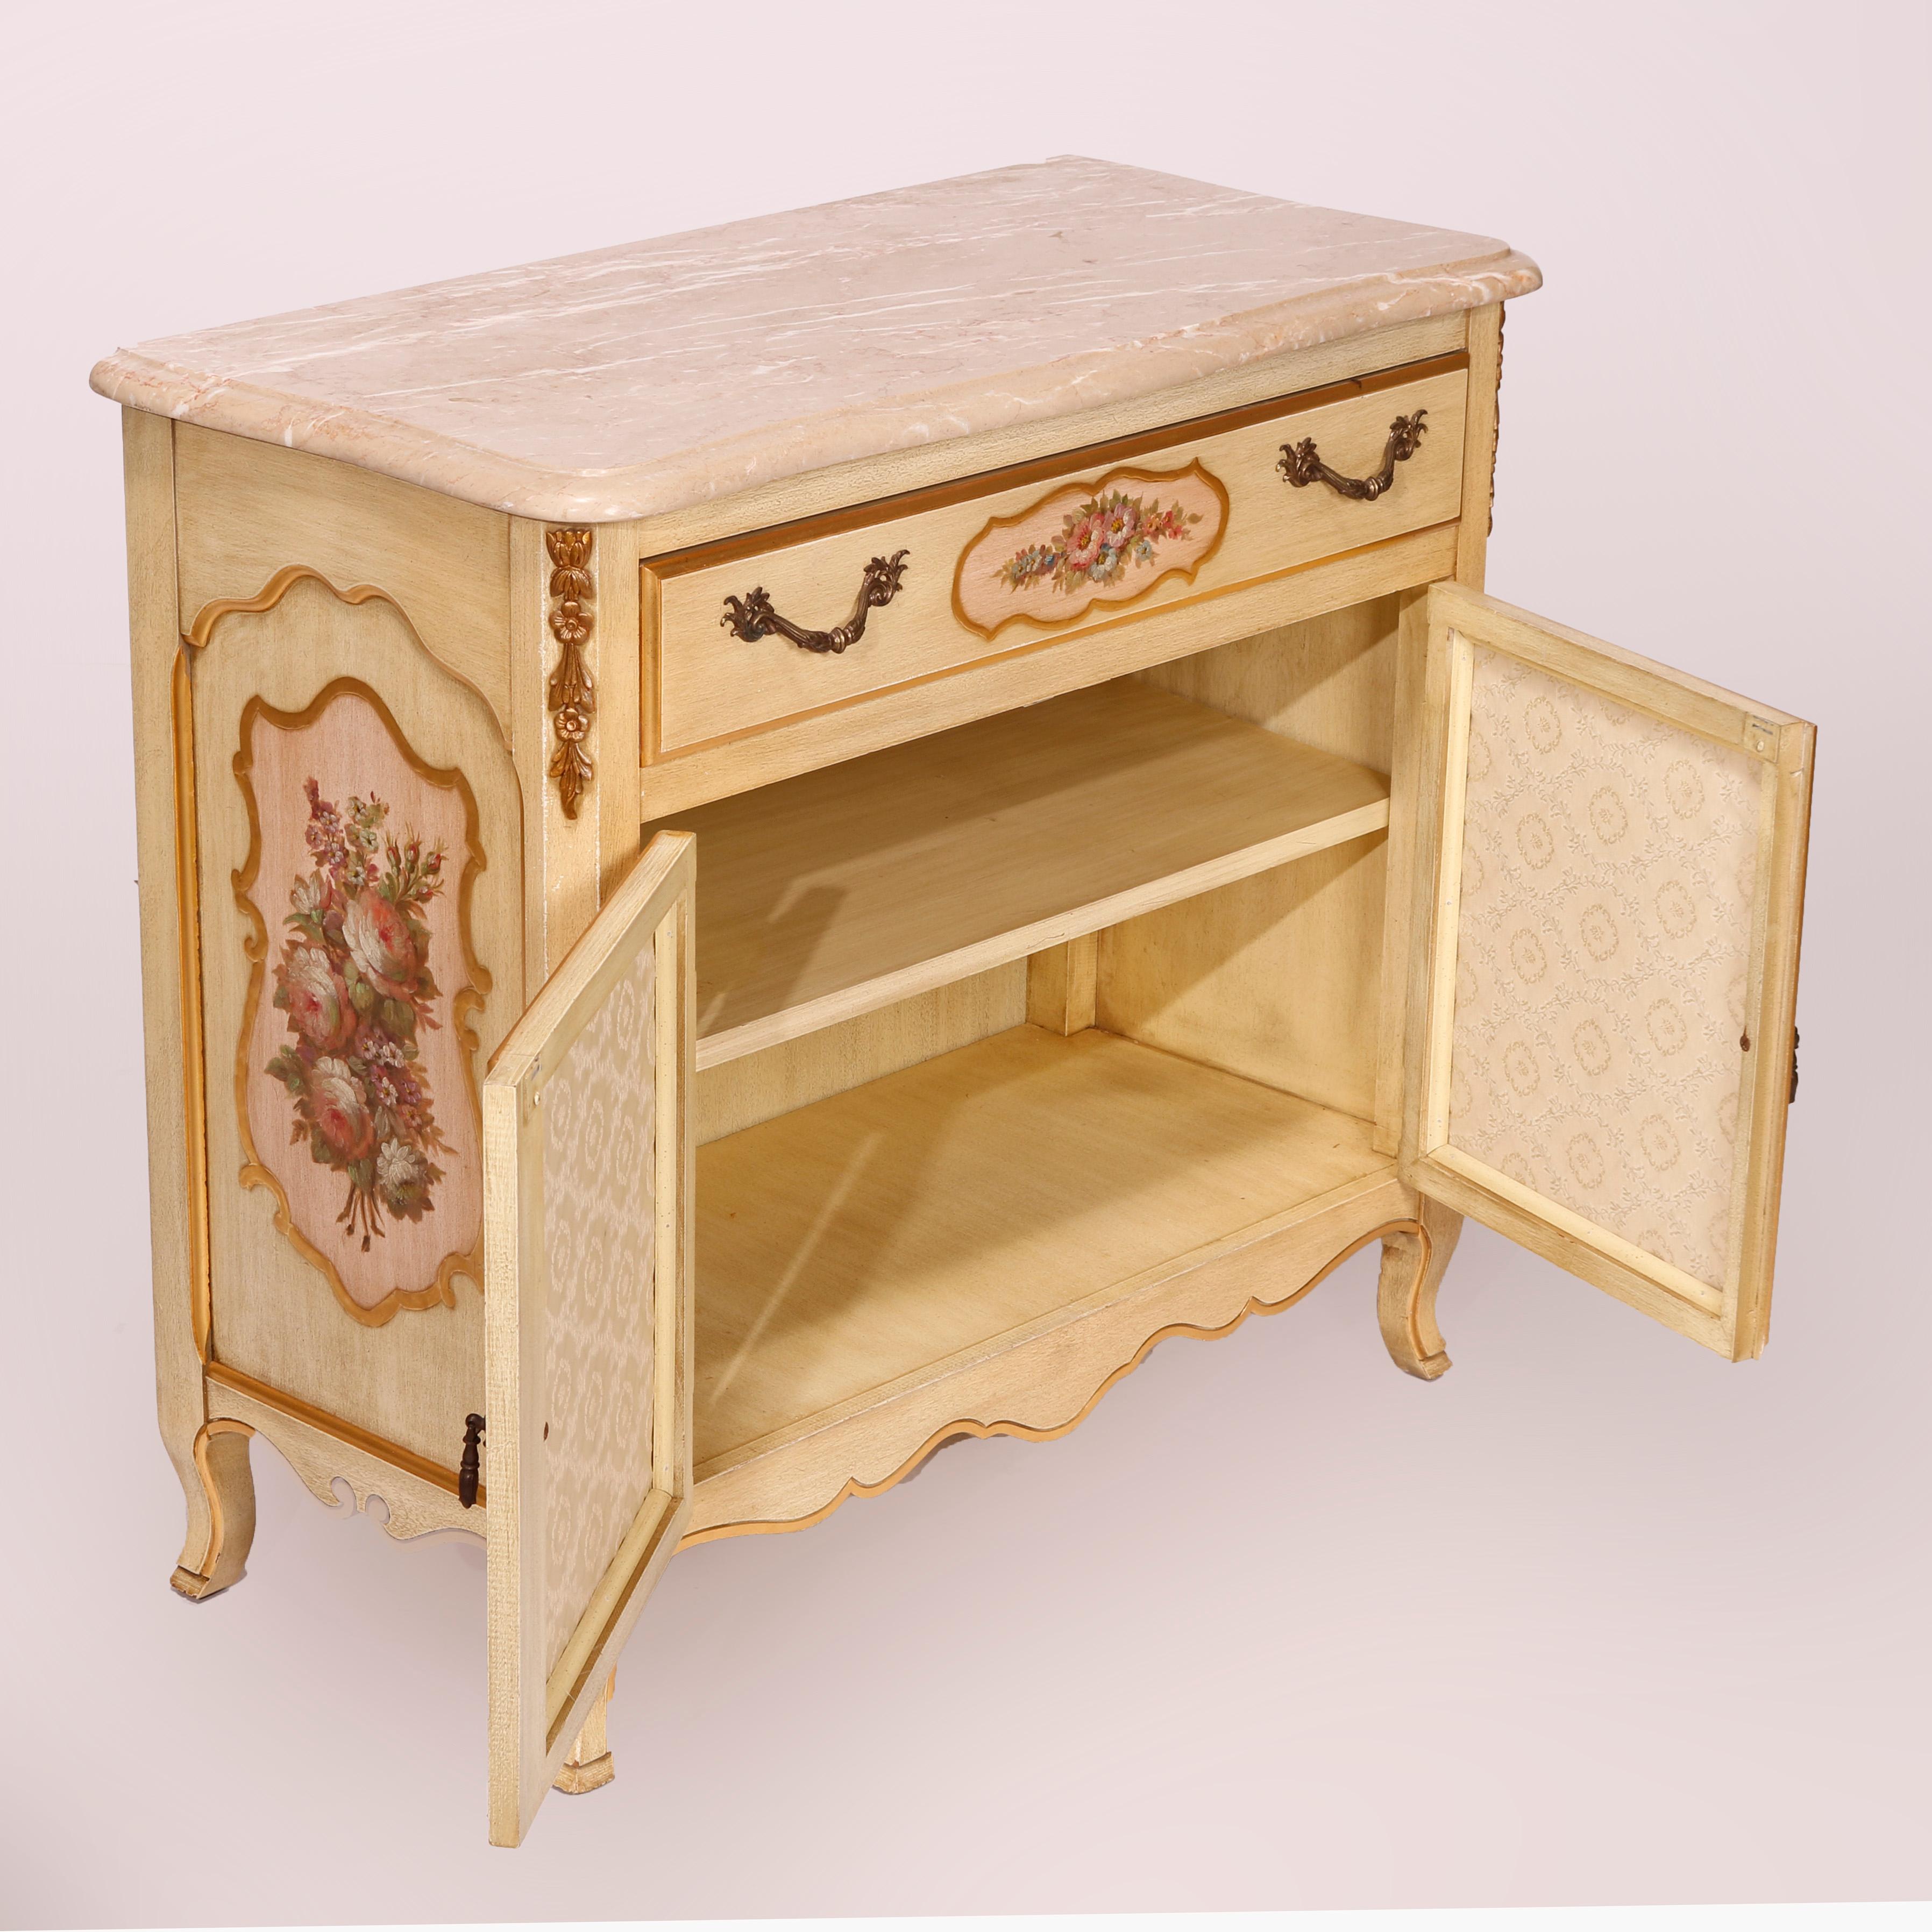 Polychromed French Provincial Style Polychrome, Gilt &Marble Commode by Kozak Studios 20th C For Sale